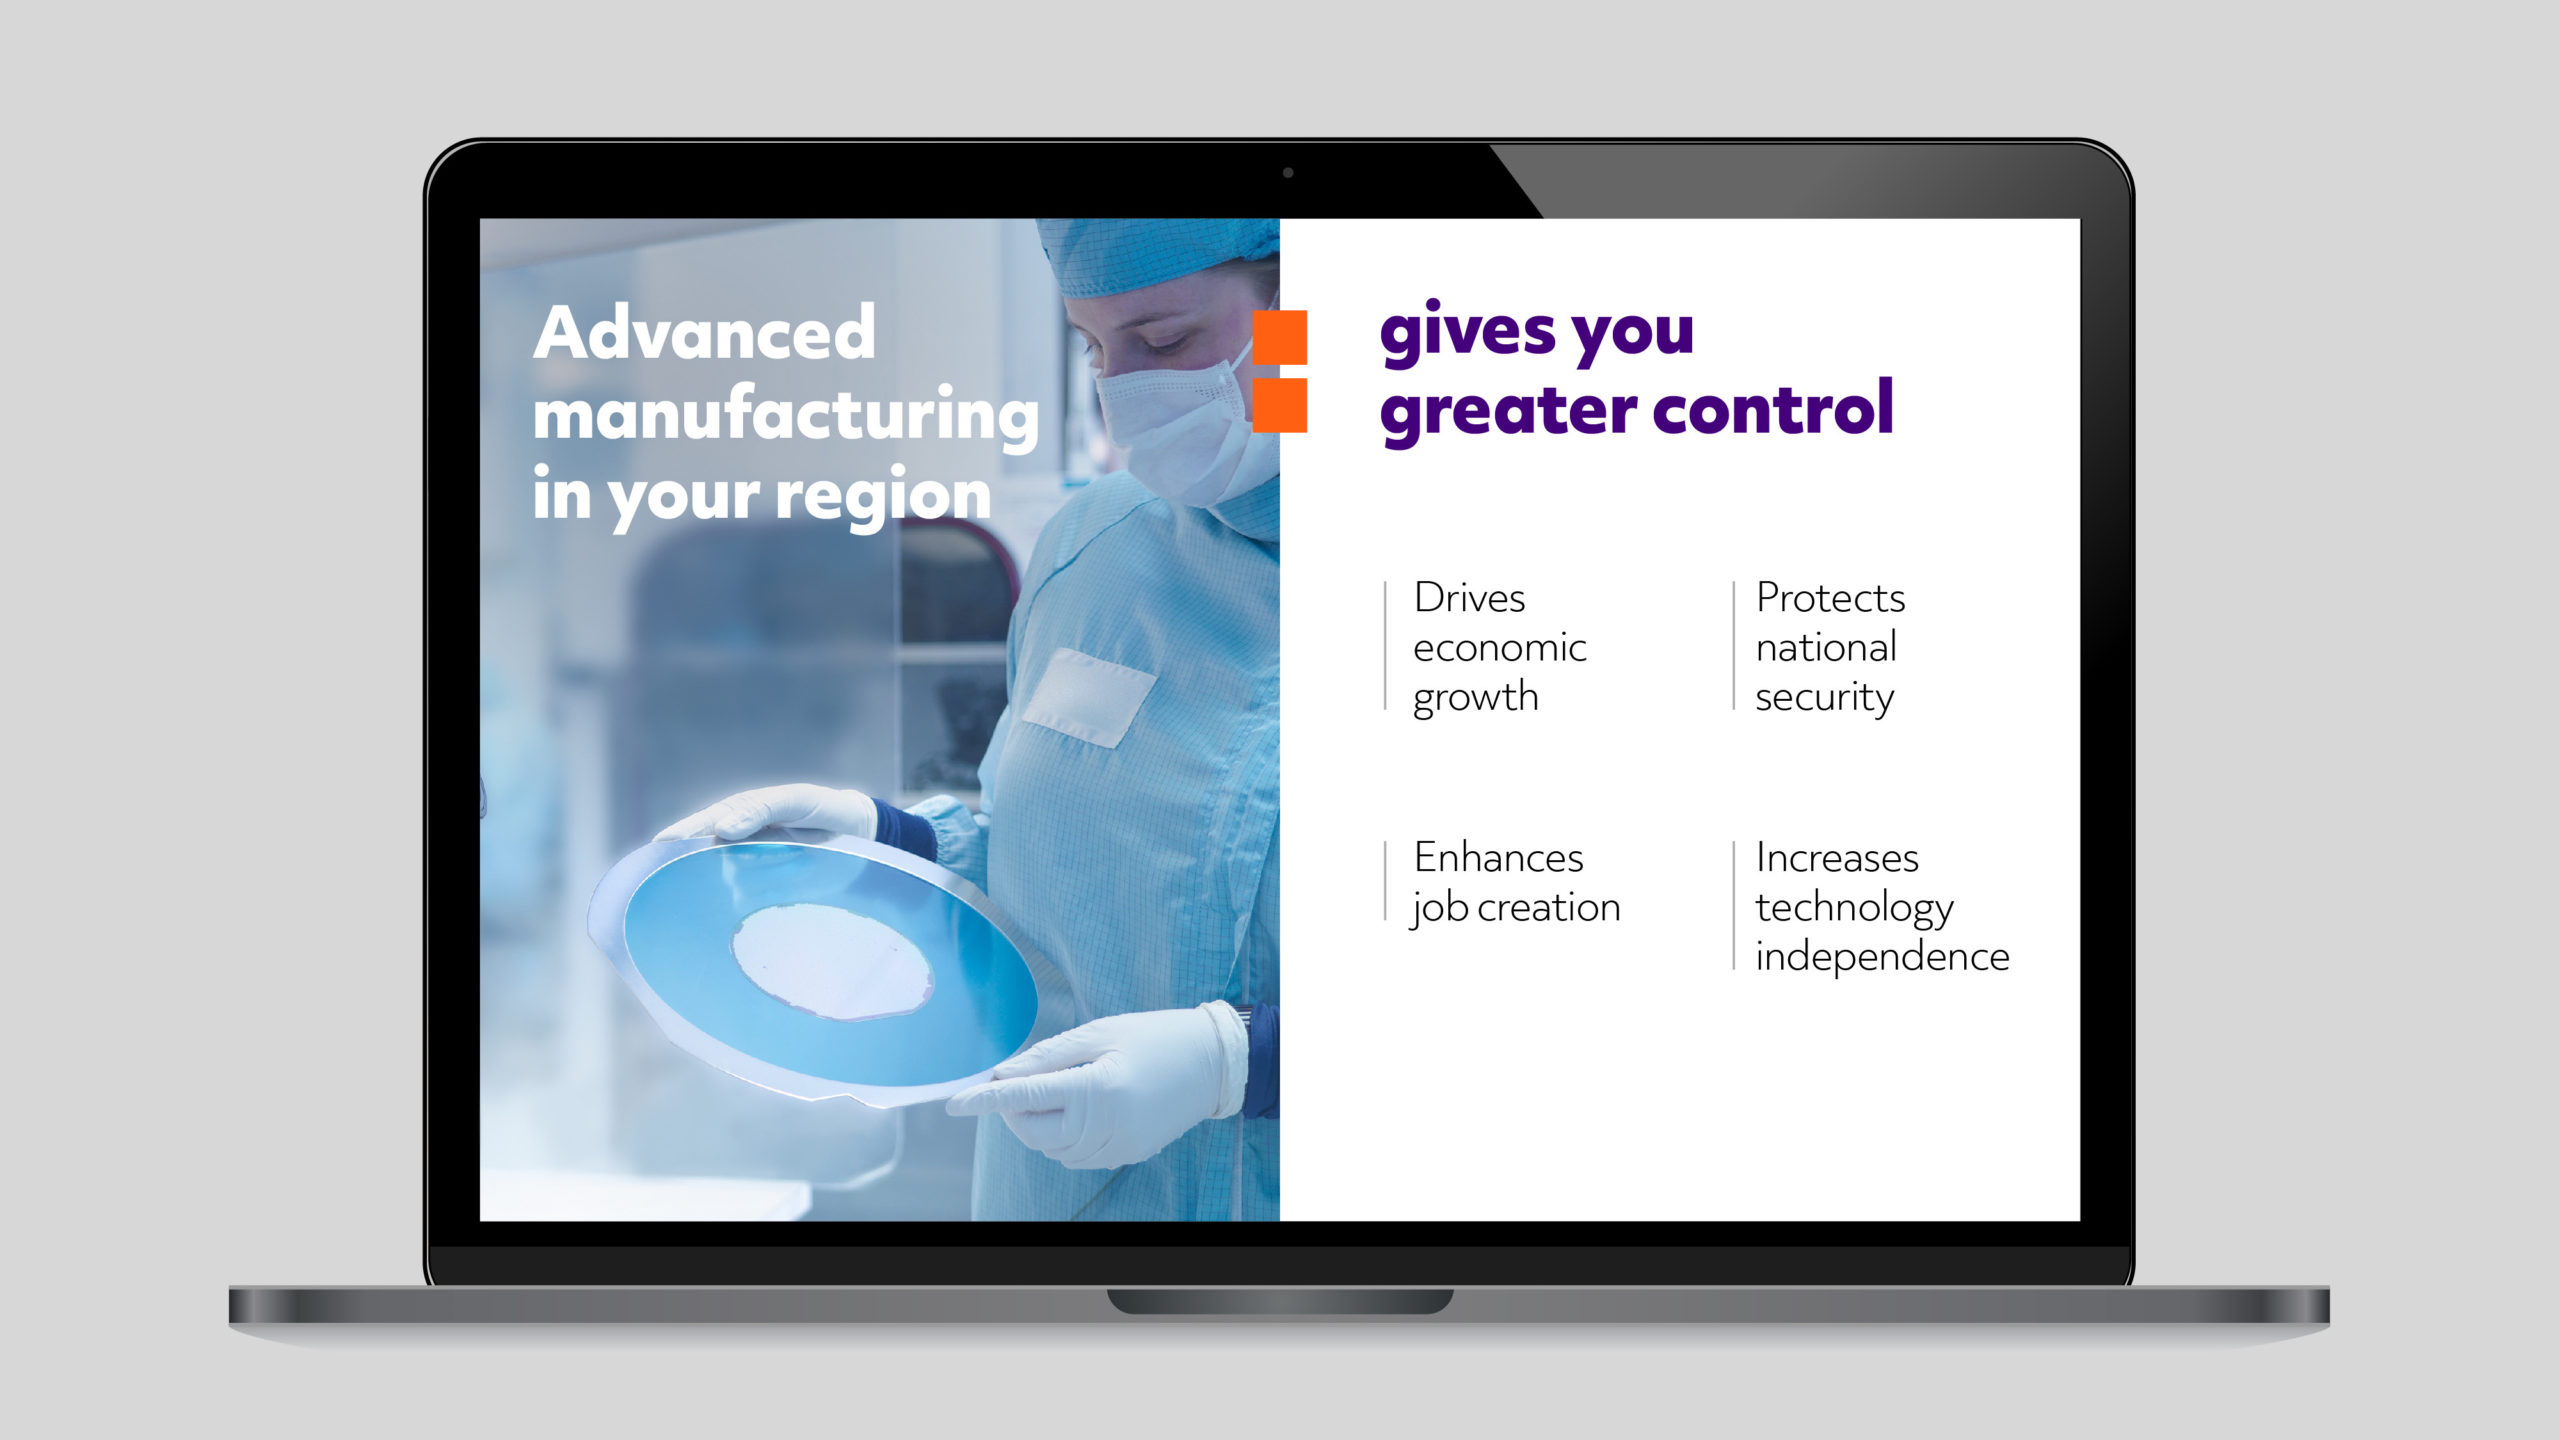 Global Foundries new visual identity on their website